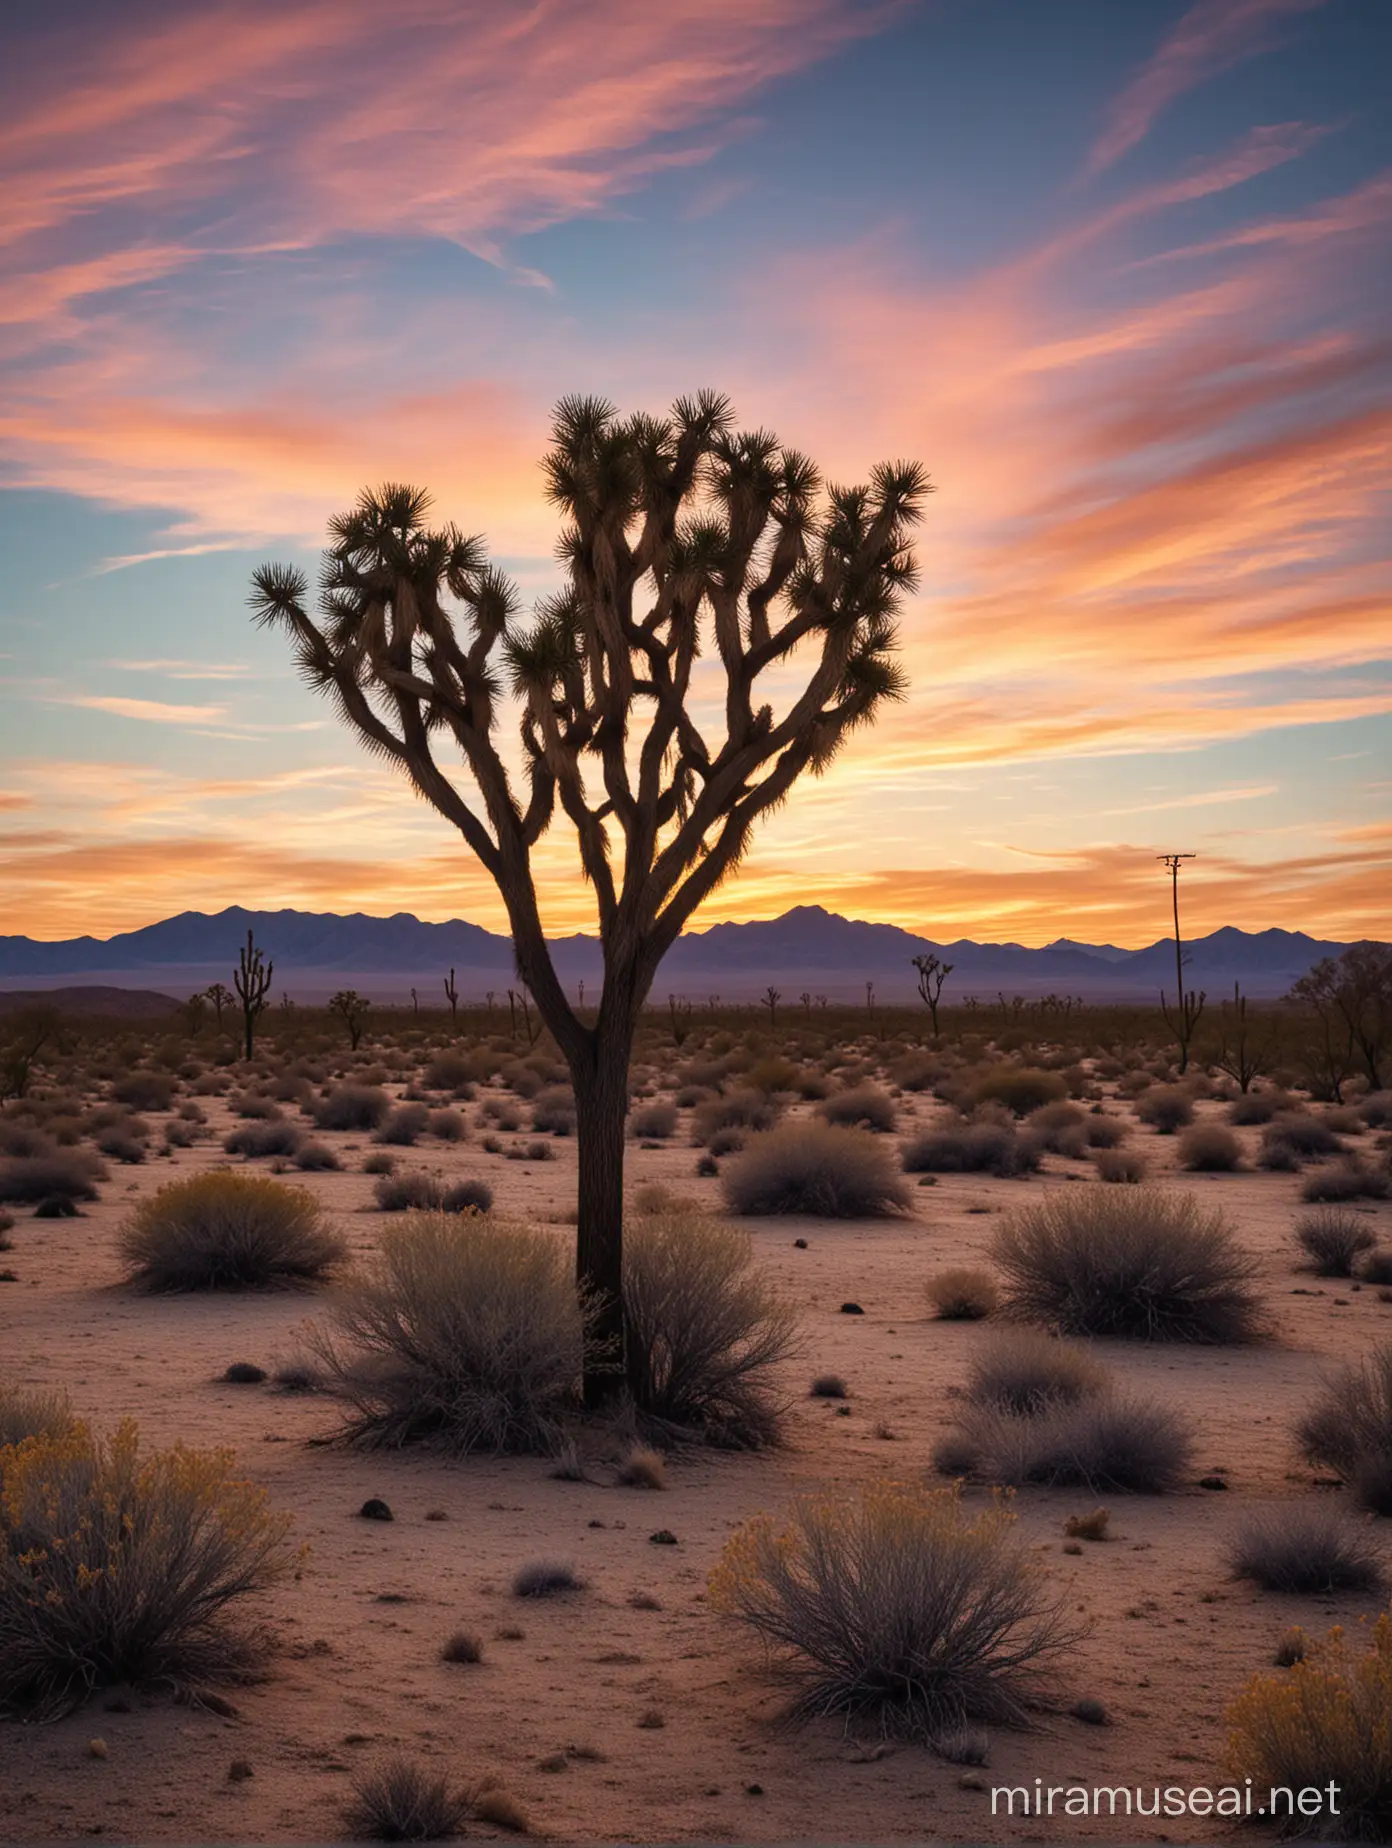 a wonderful photograph from a sunet in Mojave, serne feelings, nostalgic vibes, wonderful colors